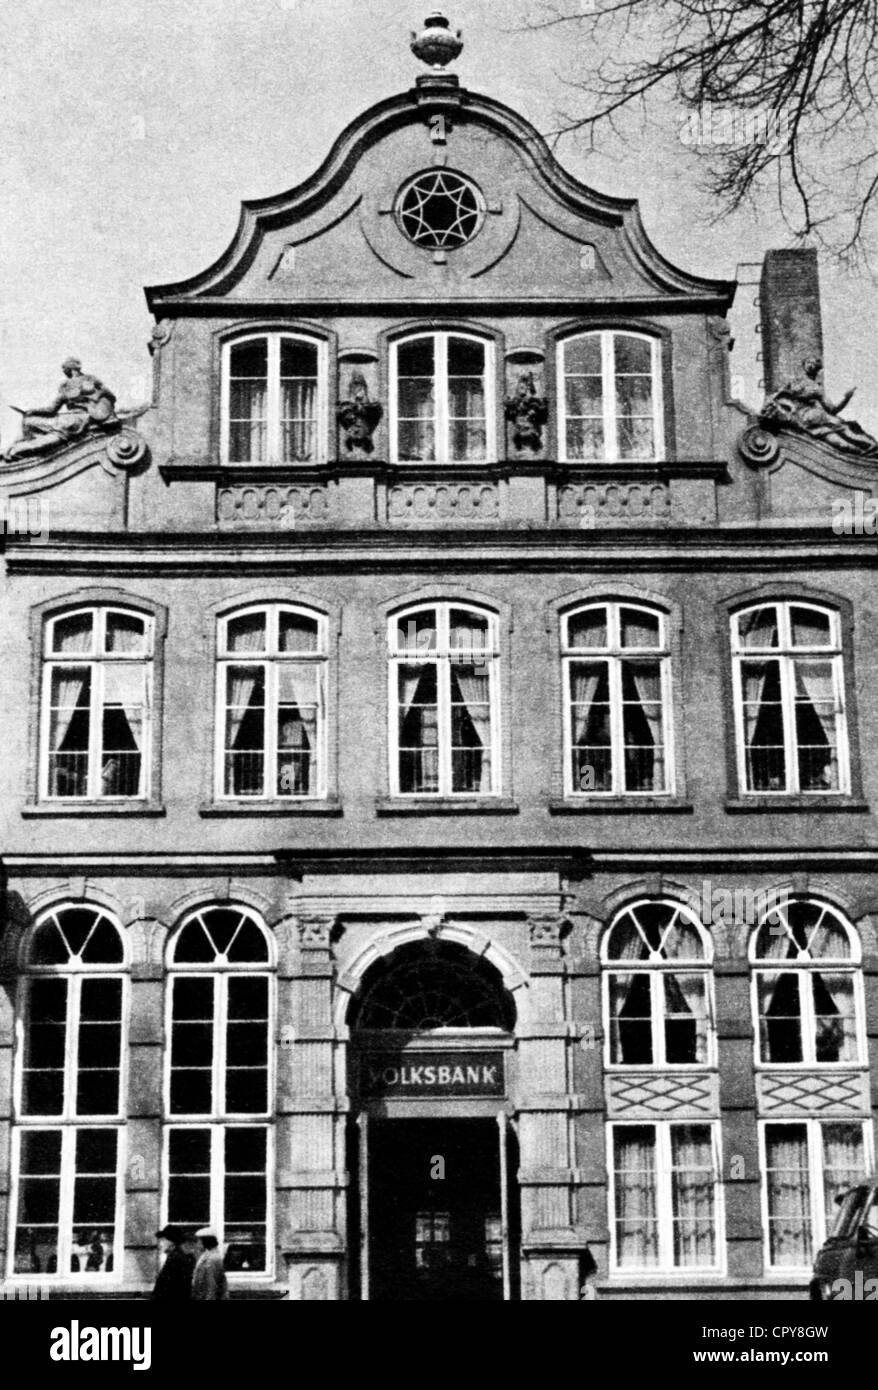 Mann, Thomas, 6.6.1875 - 12.8.1955, German author / writer, Nobel Prize in Literature 1929, the house in Luebeck where he was born ('Buddenbrookhaus') before its destruction in 1942, exterior view, Stock Photo